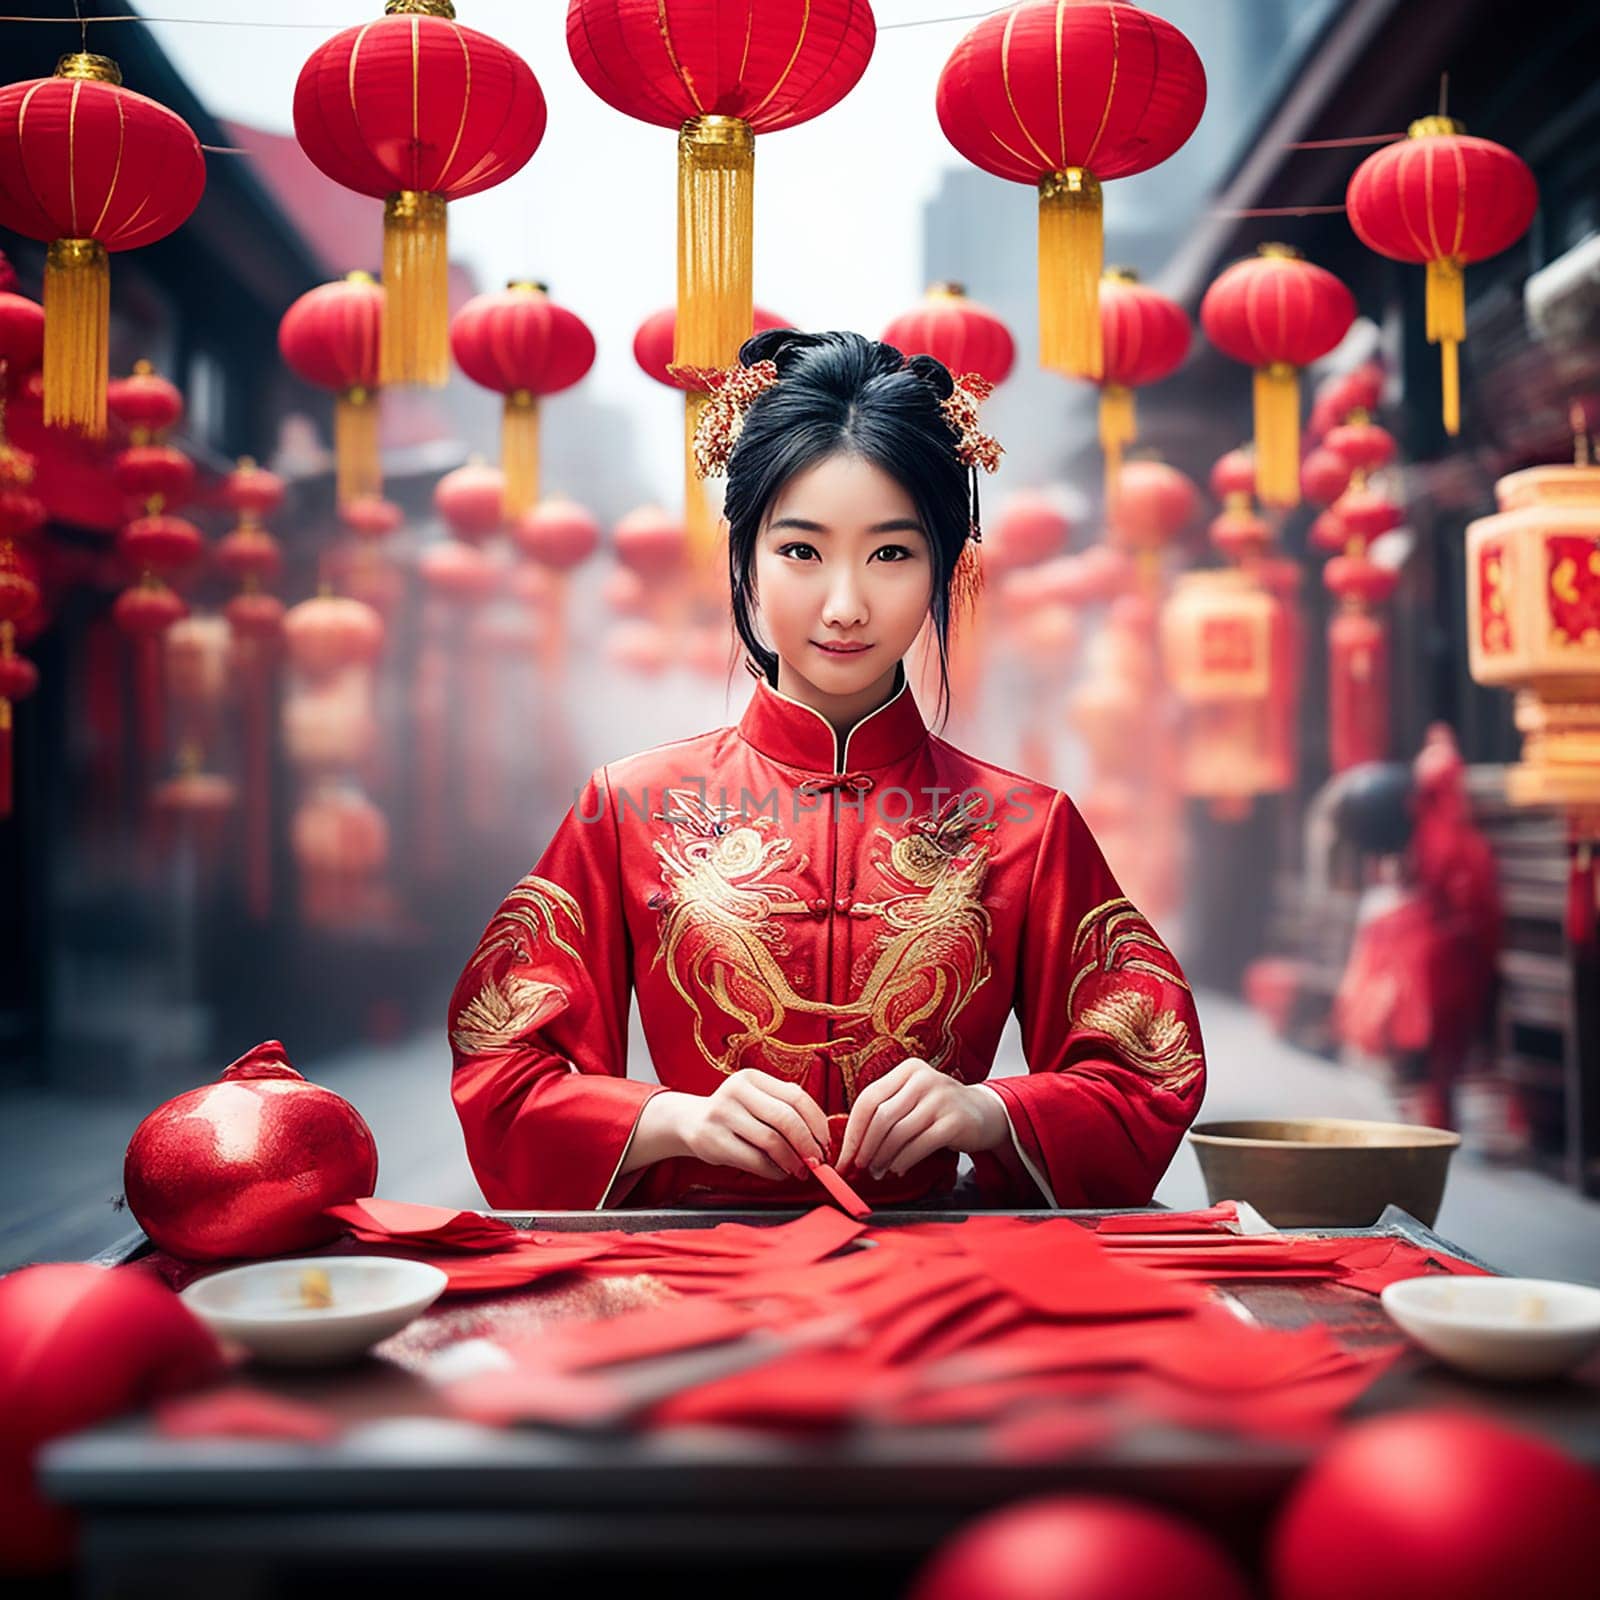 Girl Wishing You a Happy Chinese New Year by Petrichor